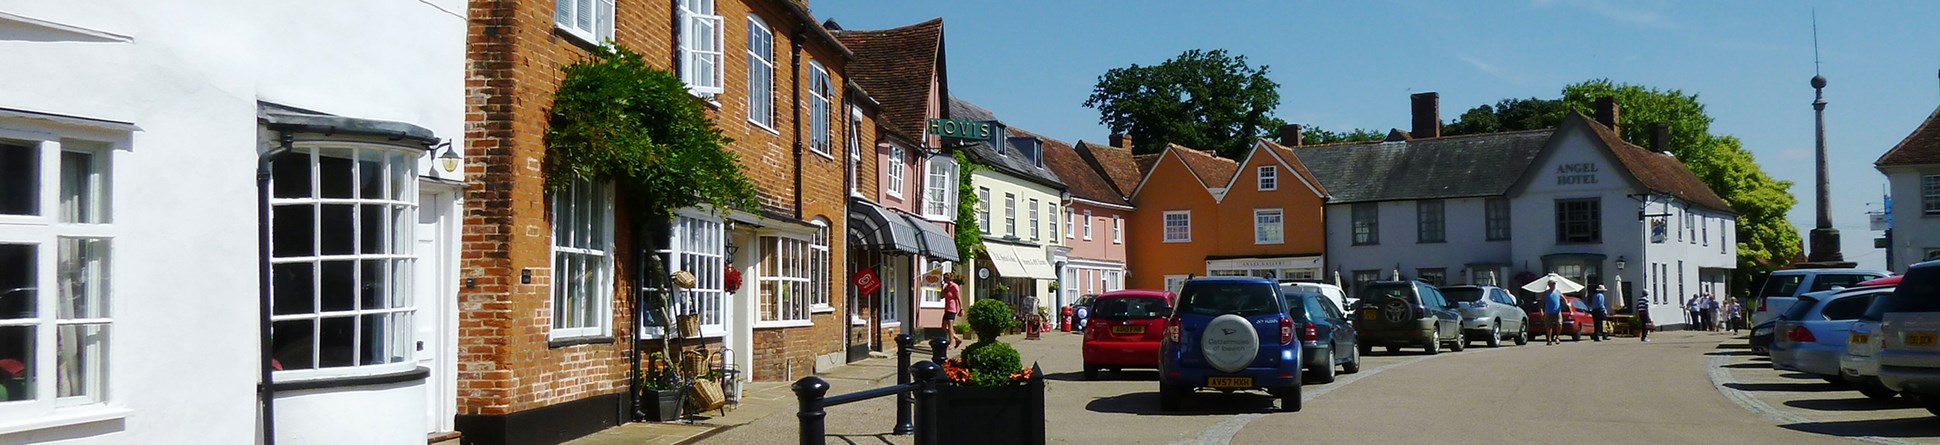 Road with houses and shops with parked cars outside